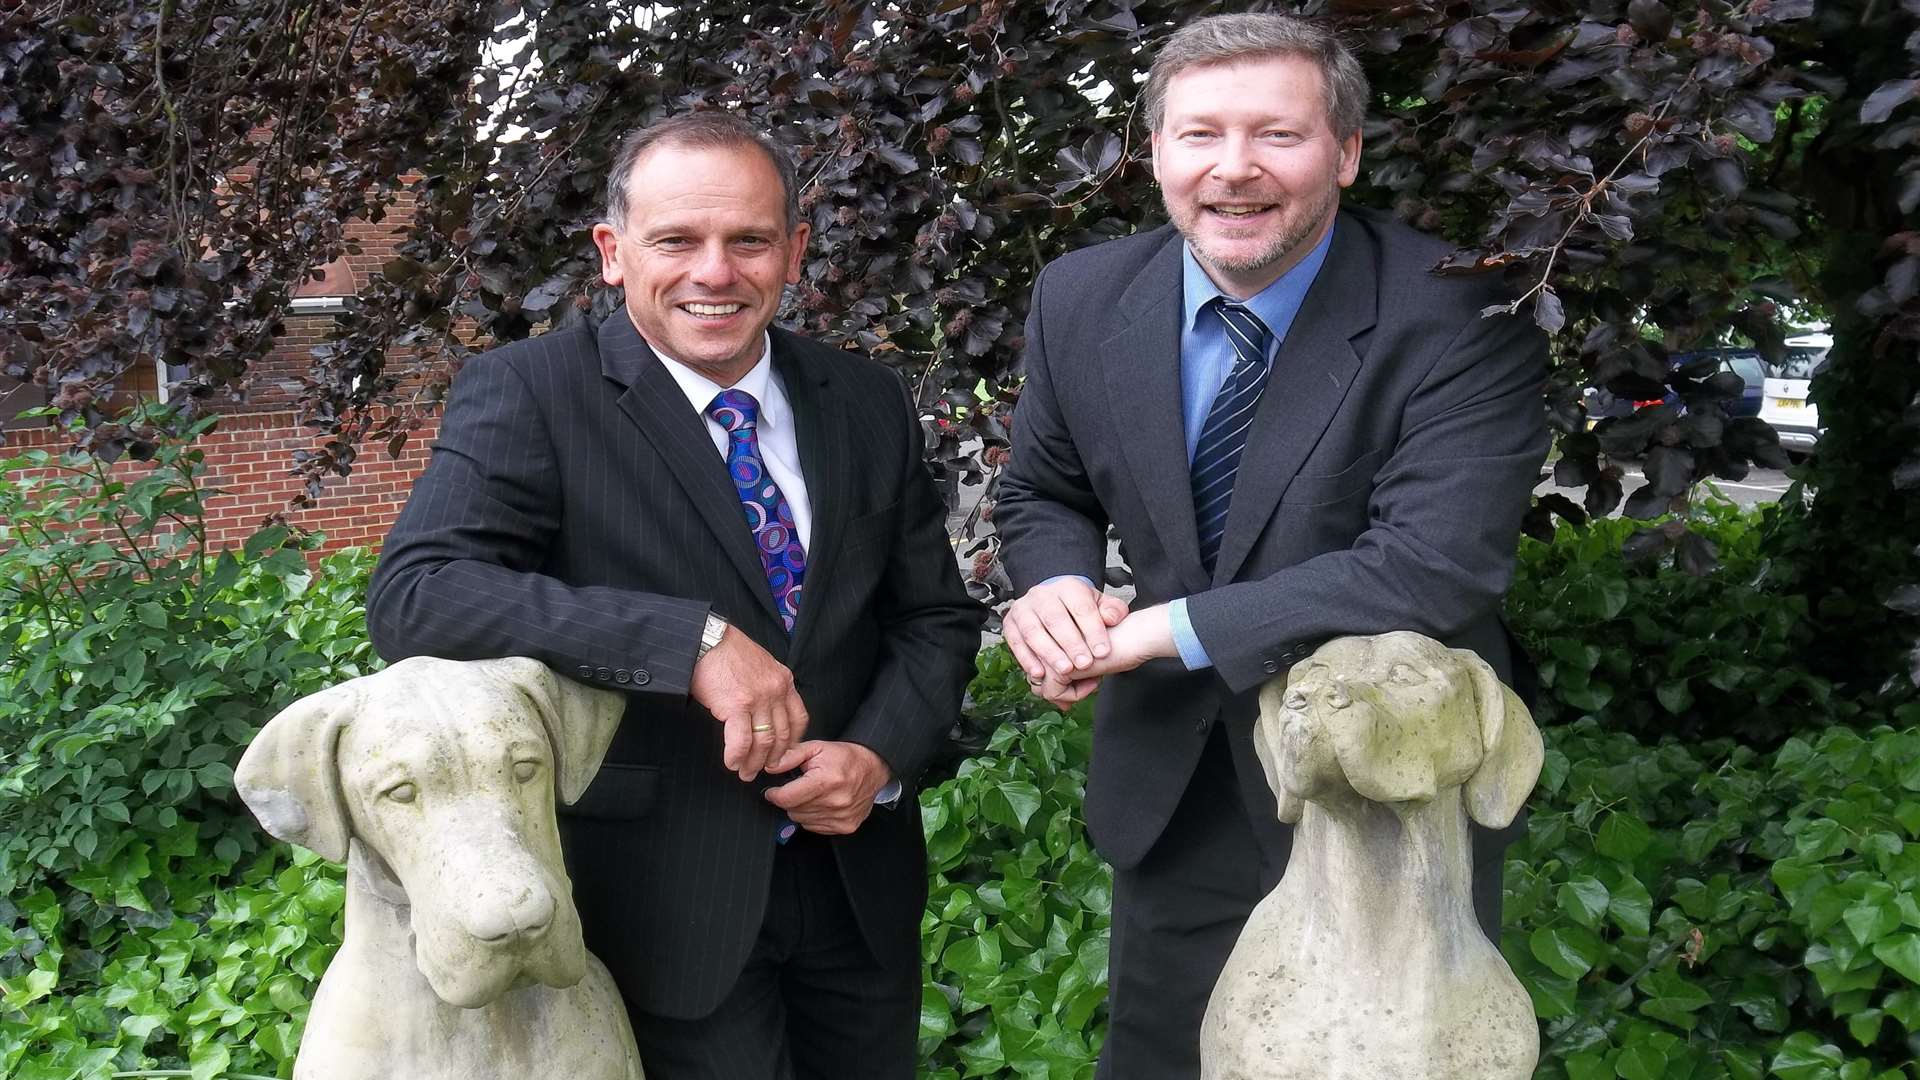 Mercure Maidstone Great Danes Hotel general manager Dominic Di Cara and KM Charity Team chief executive Simon Dolby